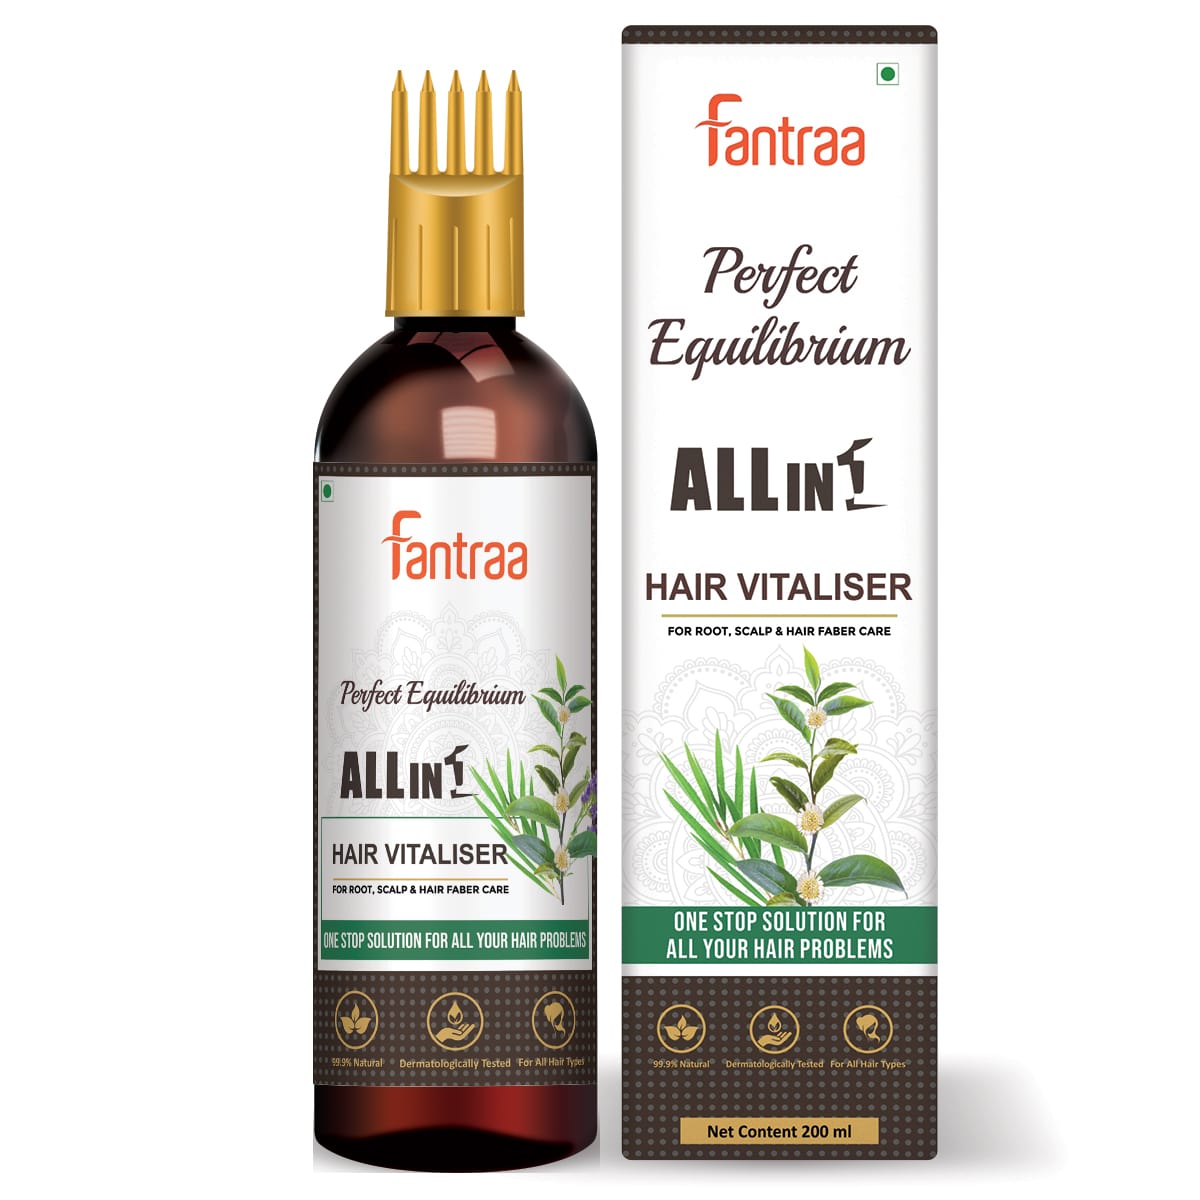 All in 1 Hair Vitaliser For Root, Scalp & Hair Care With COMB APPLICATOR Hair Oil, 200ml